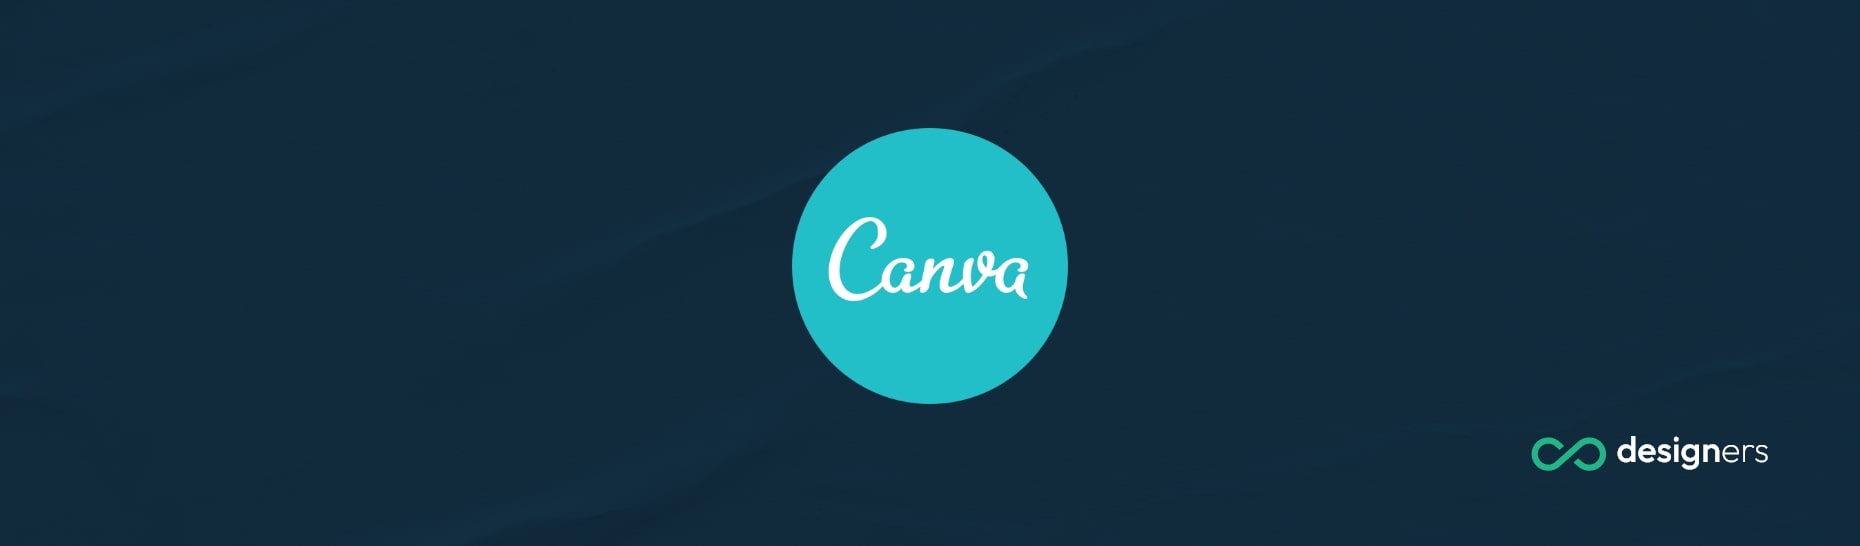 Who Uses Canva the Most?